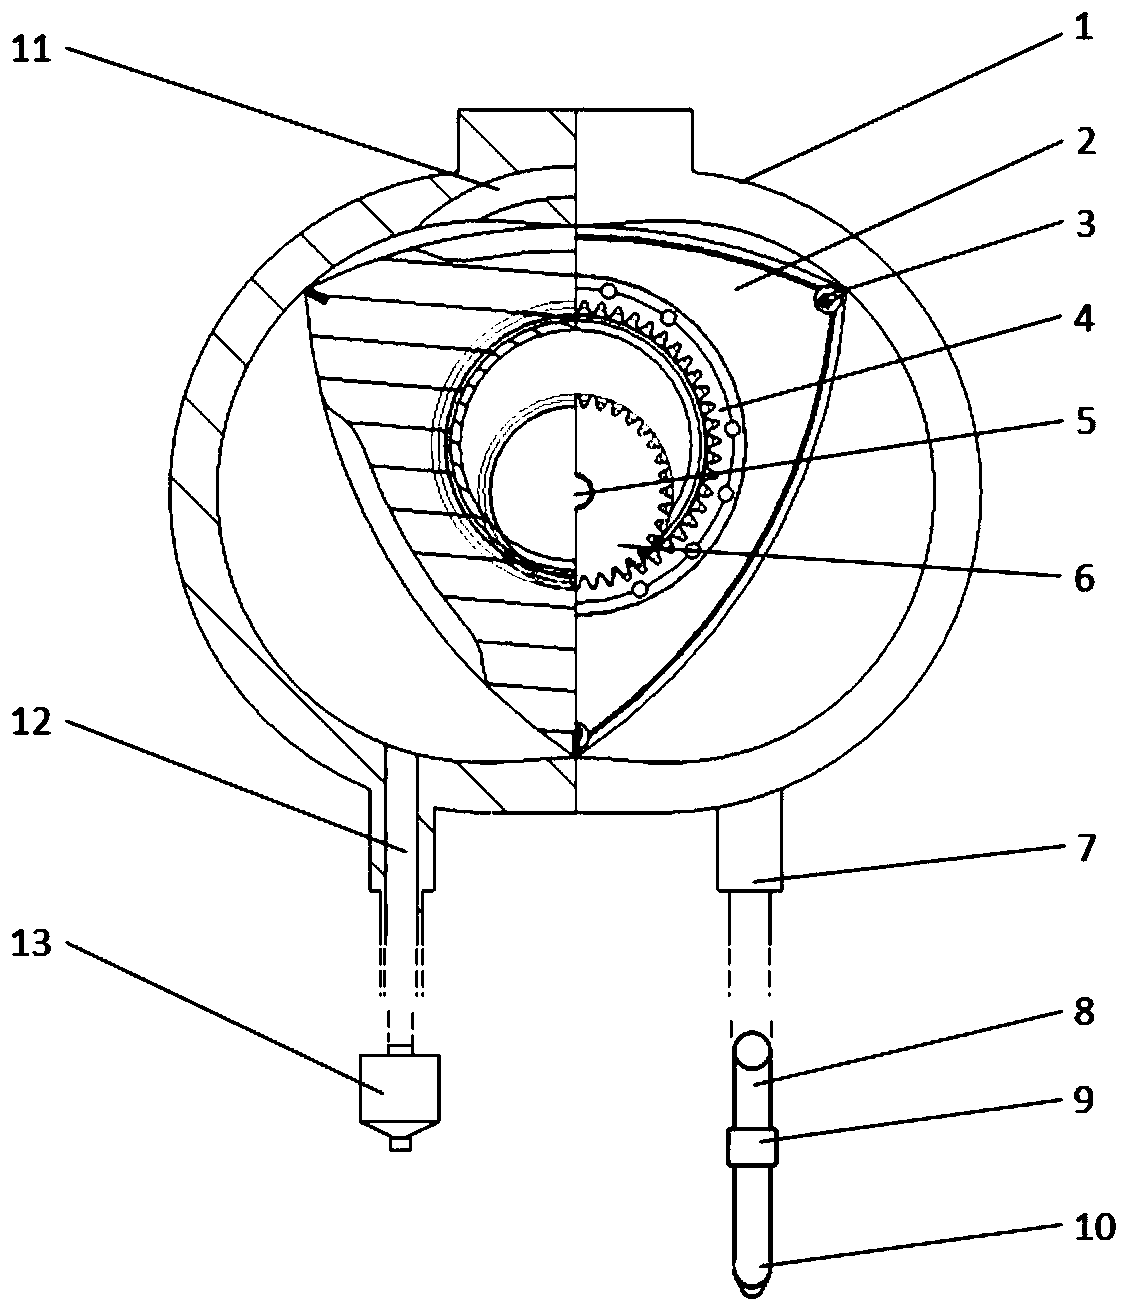 Water jet propulsion device of triangle rotor